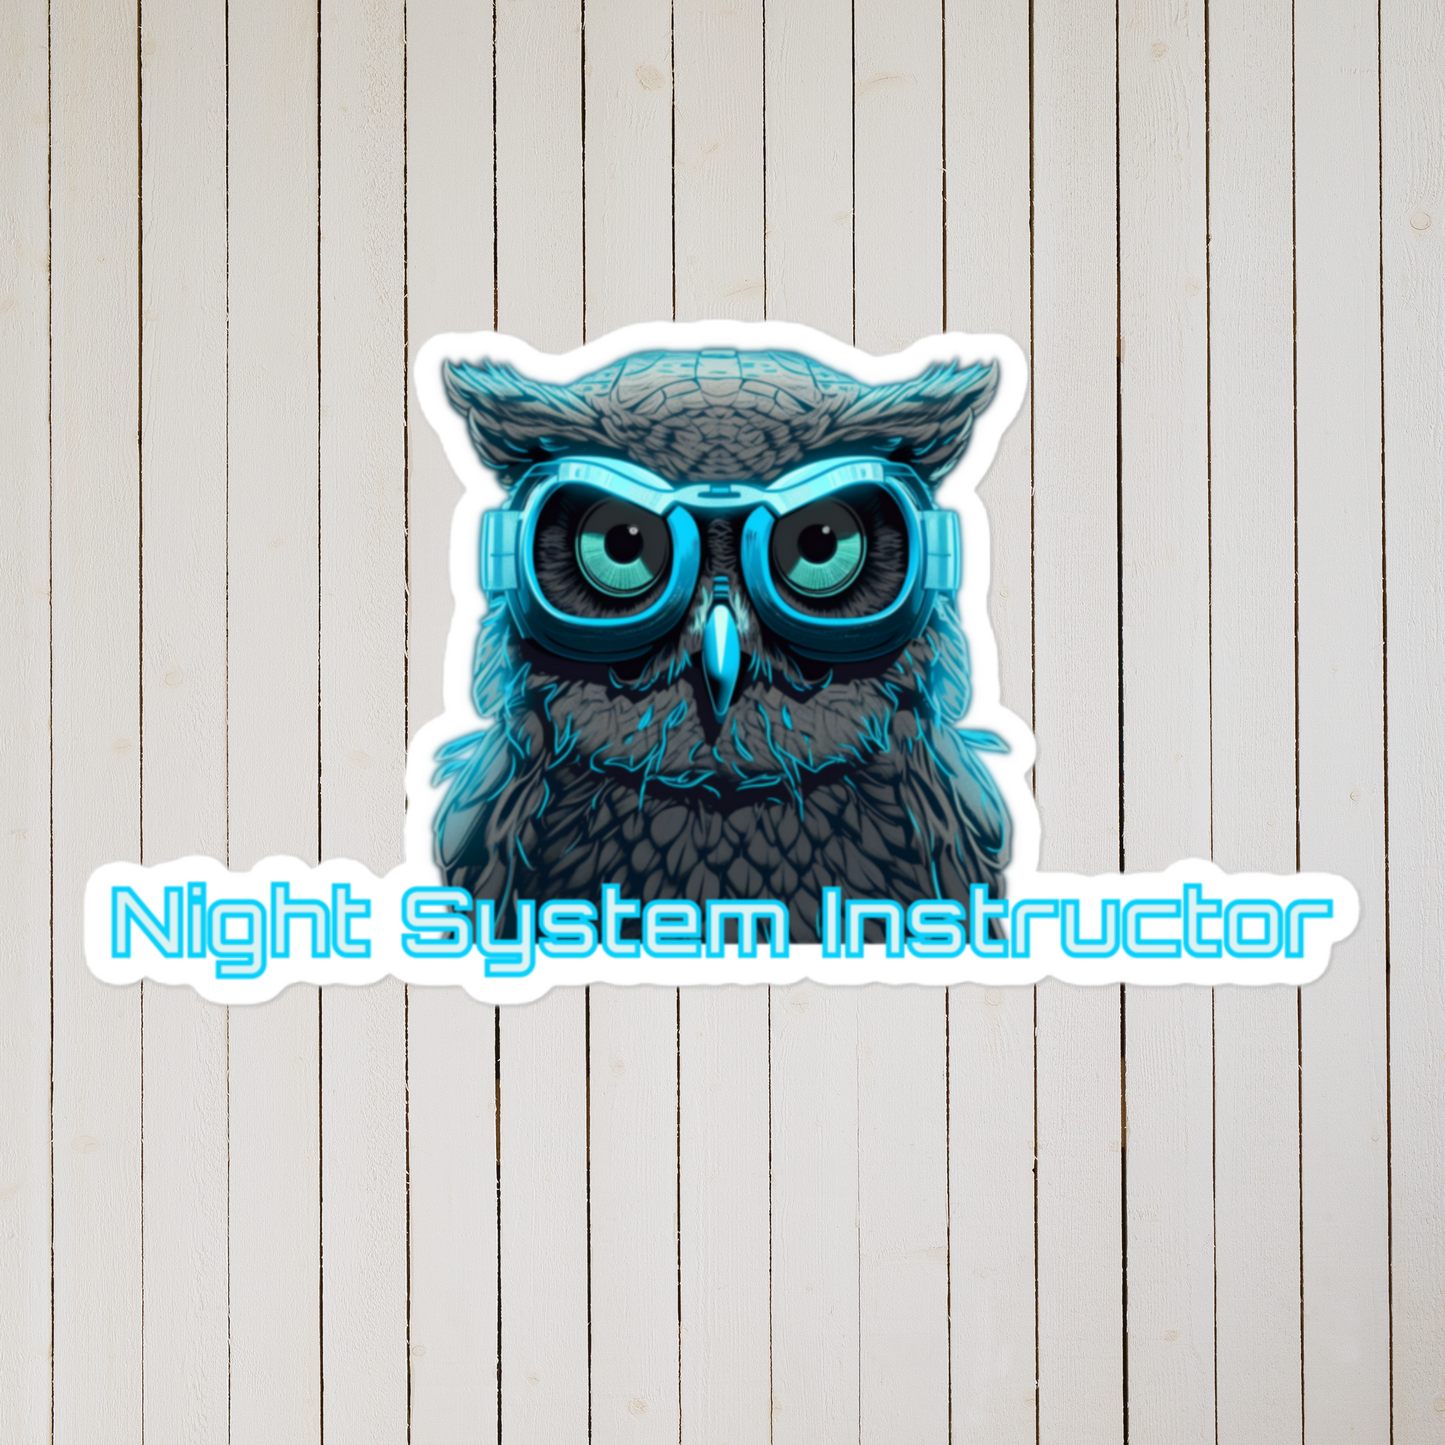 Night System Instructor. Bubble-free stickers